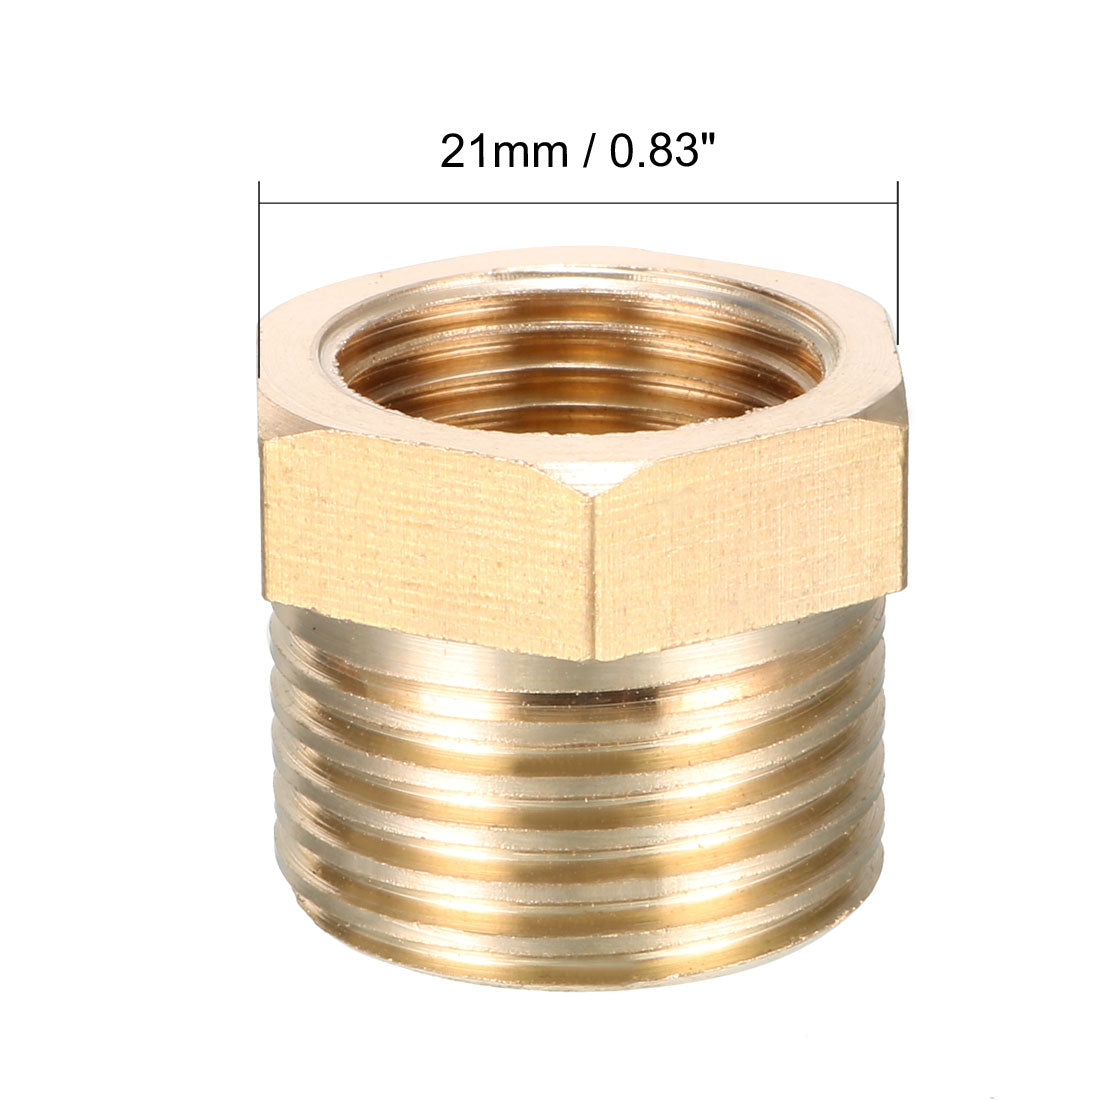 uxcell Uxcell Brass Threaded Pipe Fitting G1/2 Male x G3/8 Female Hex Bushing Adapter 2pcs